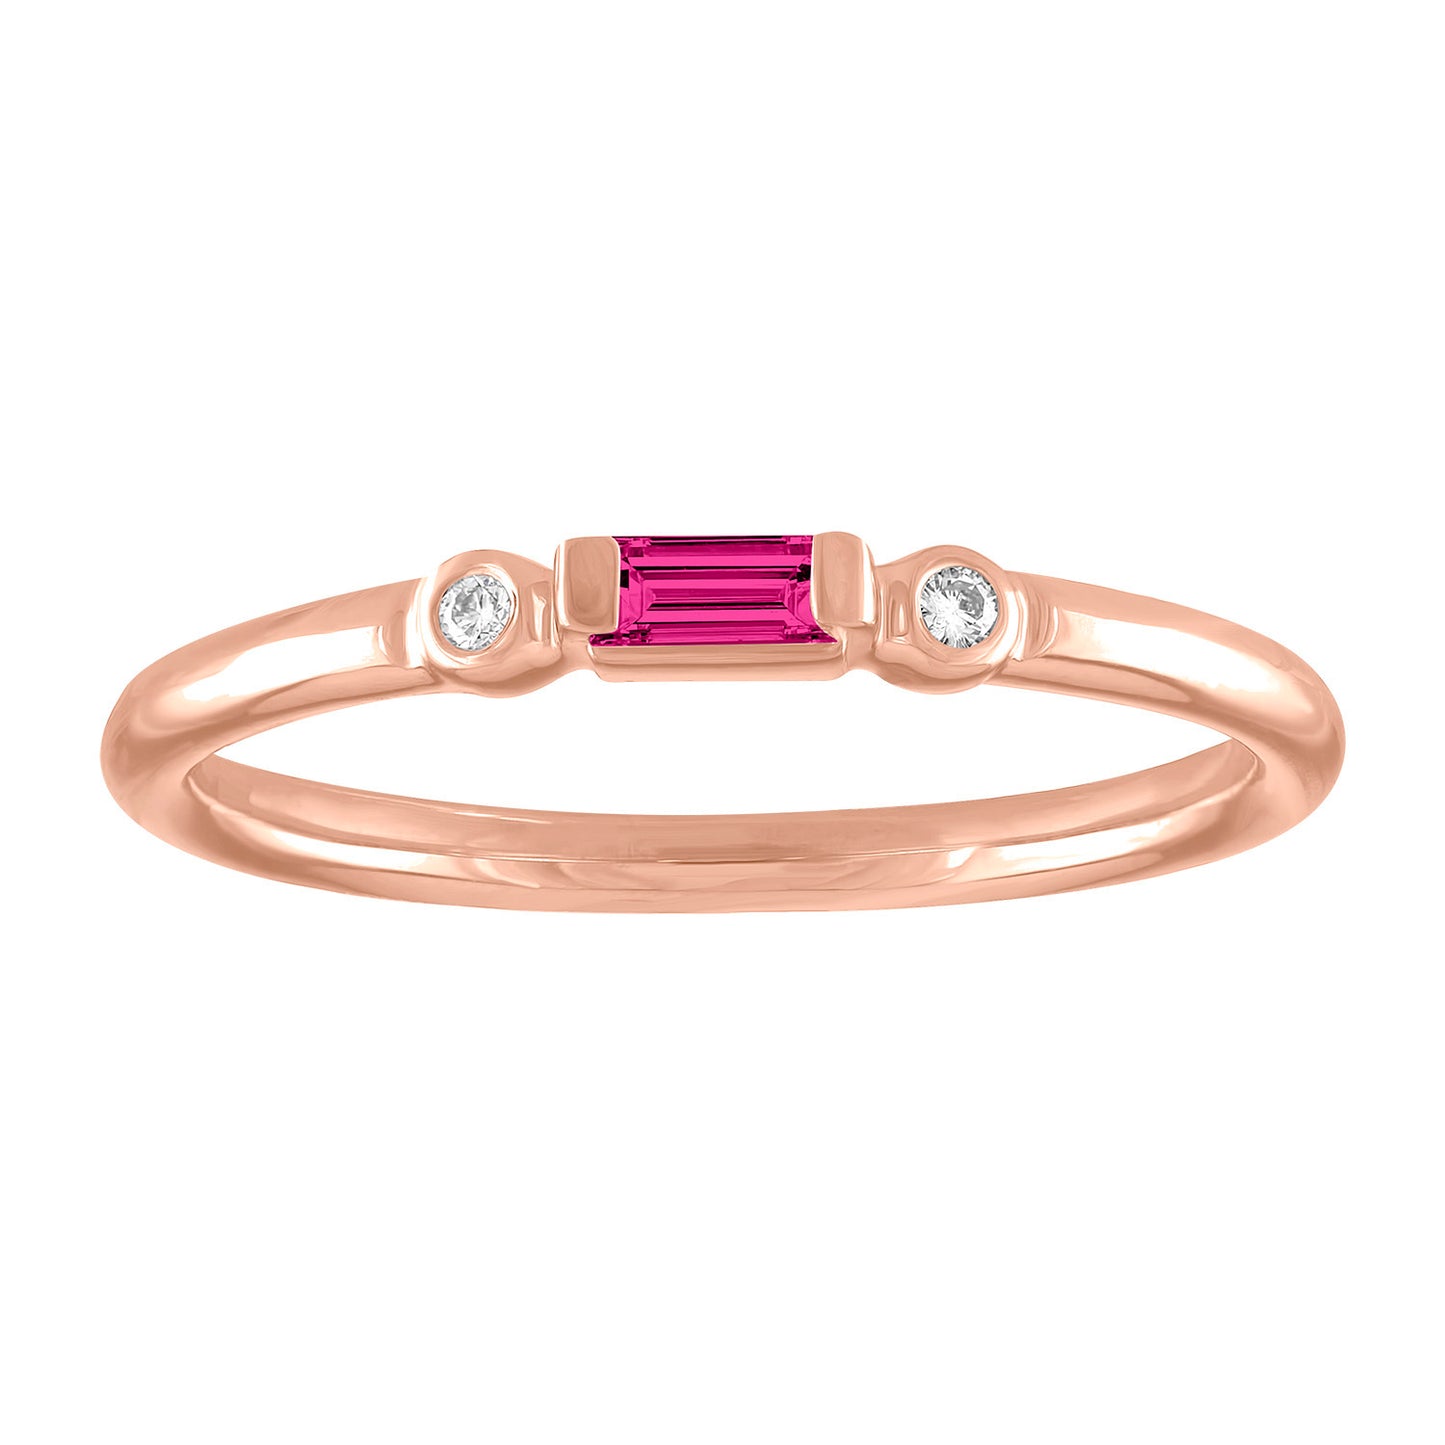 Rose gold skinny band with a pink tourmaline baguette in the center and two round diamonds on the side. 